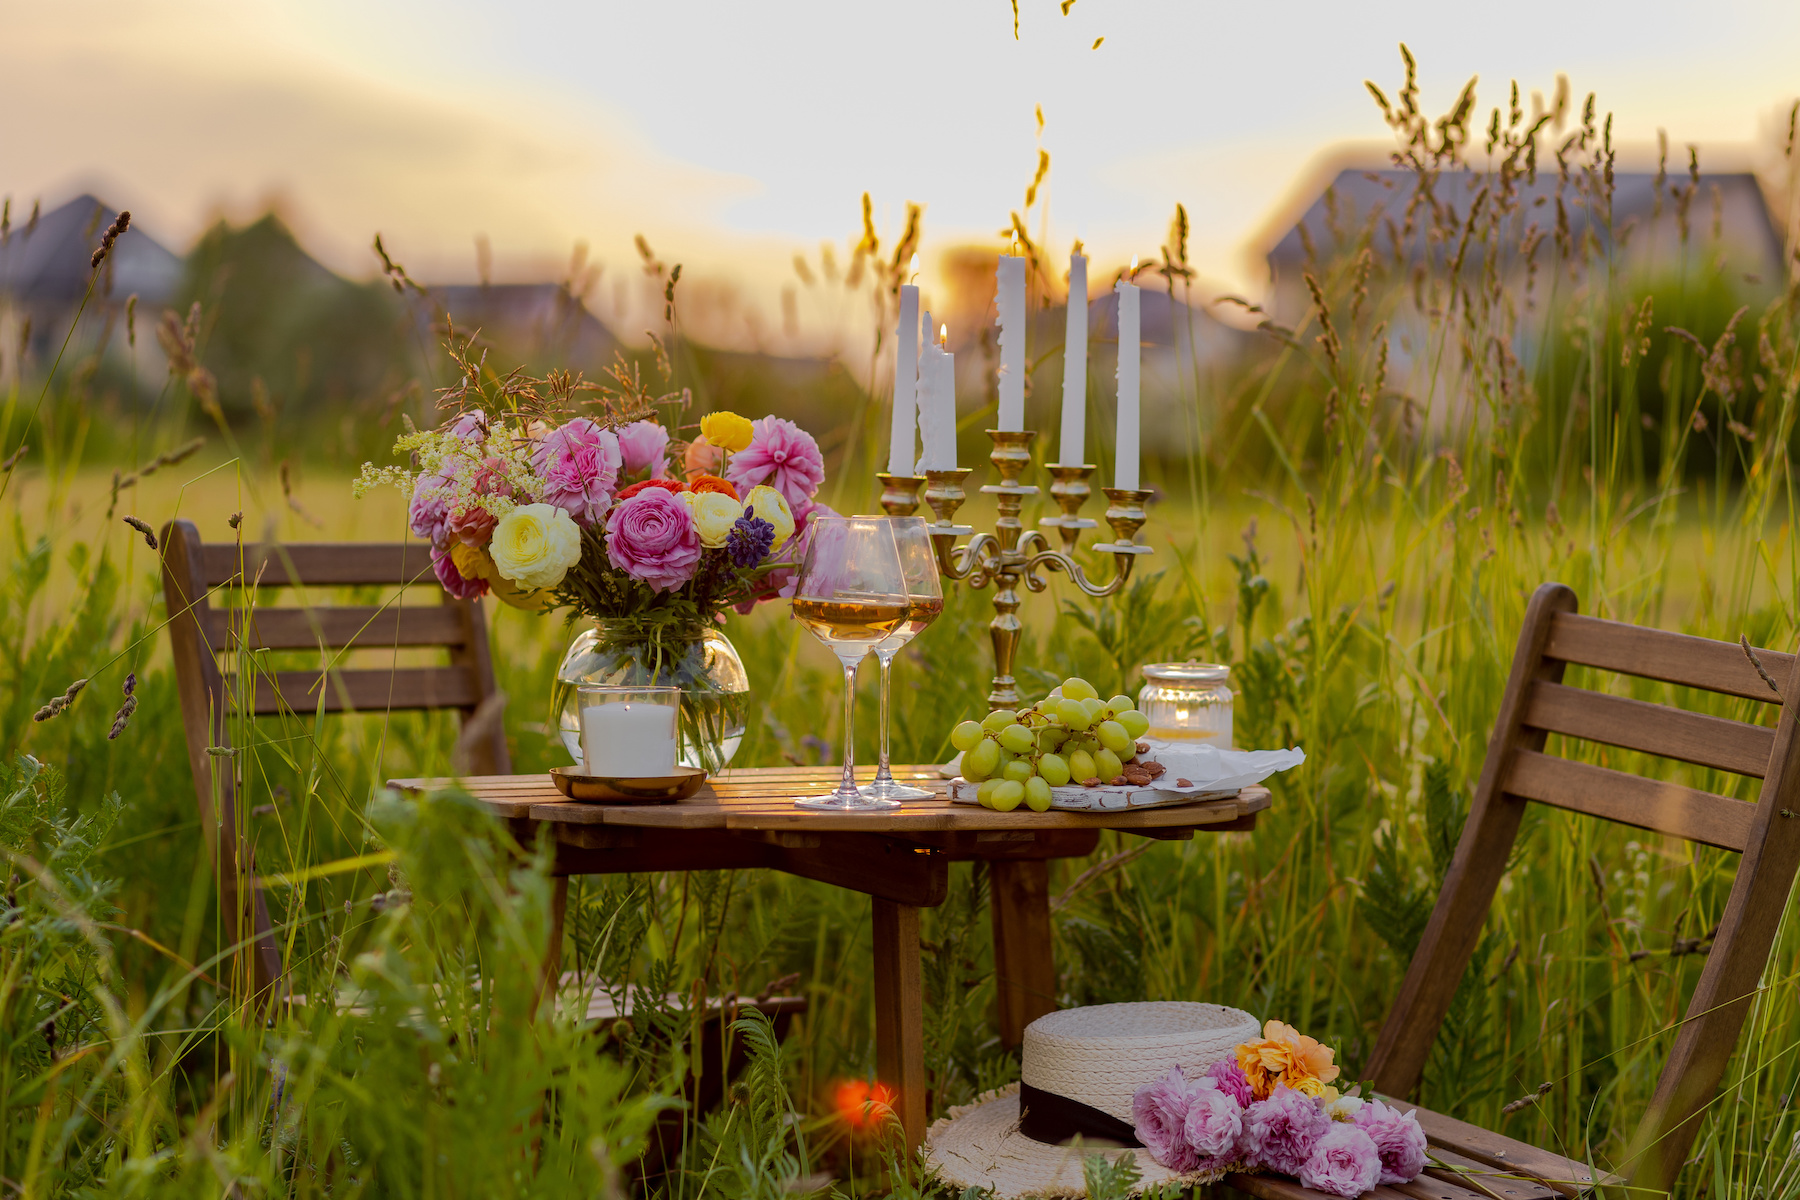 Romantic surprise, marriage proposal. Elegant decoration. Private wedding party for two, table set with floral decor, chandelier, fruits, wine in field or meadow. Summer, sunset, golden hour.